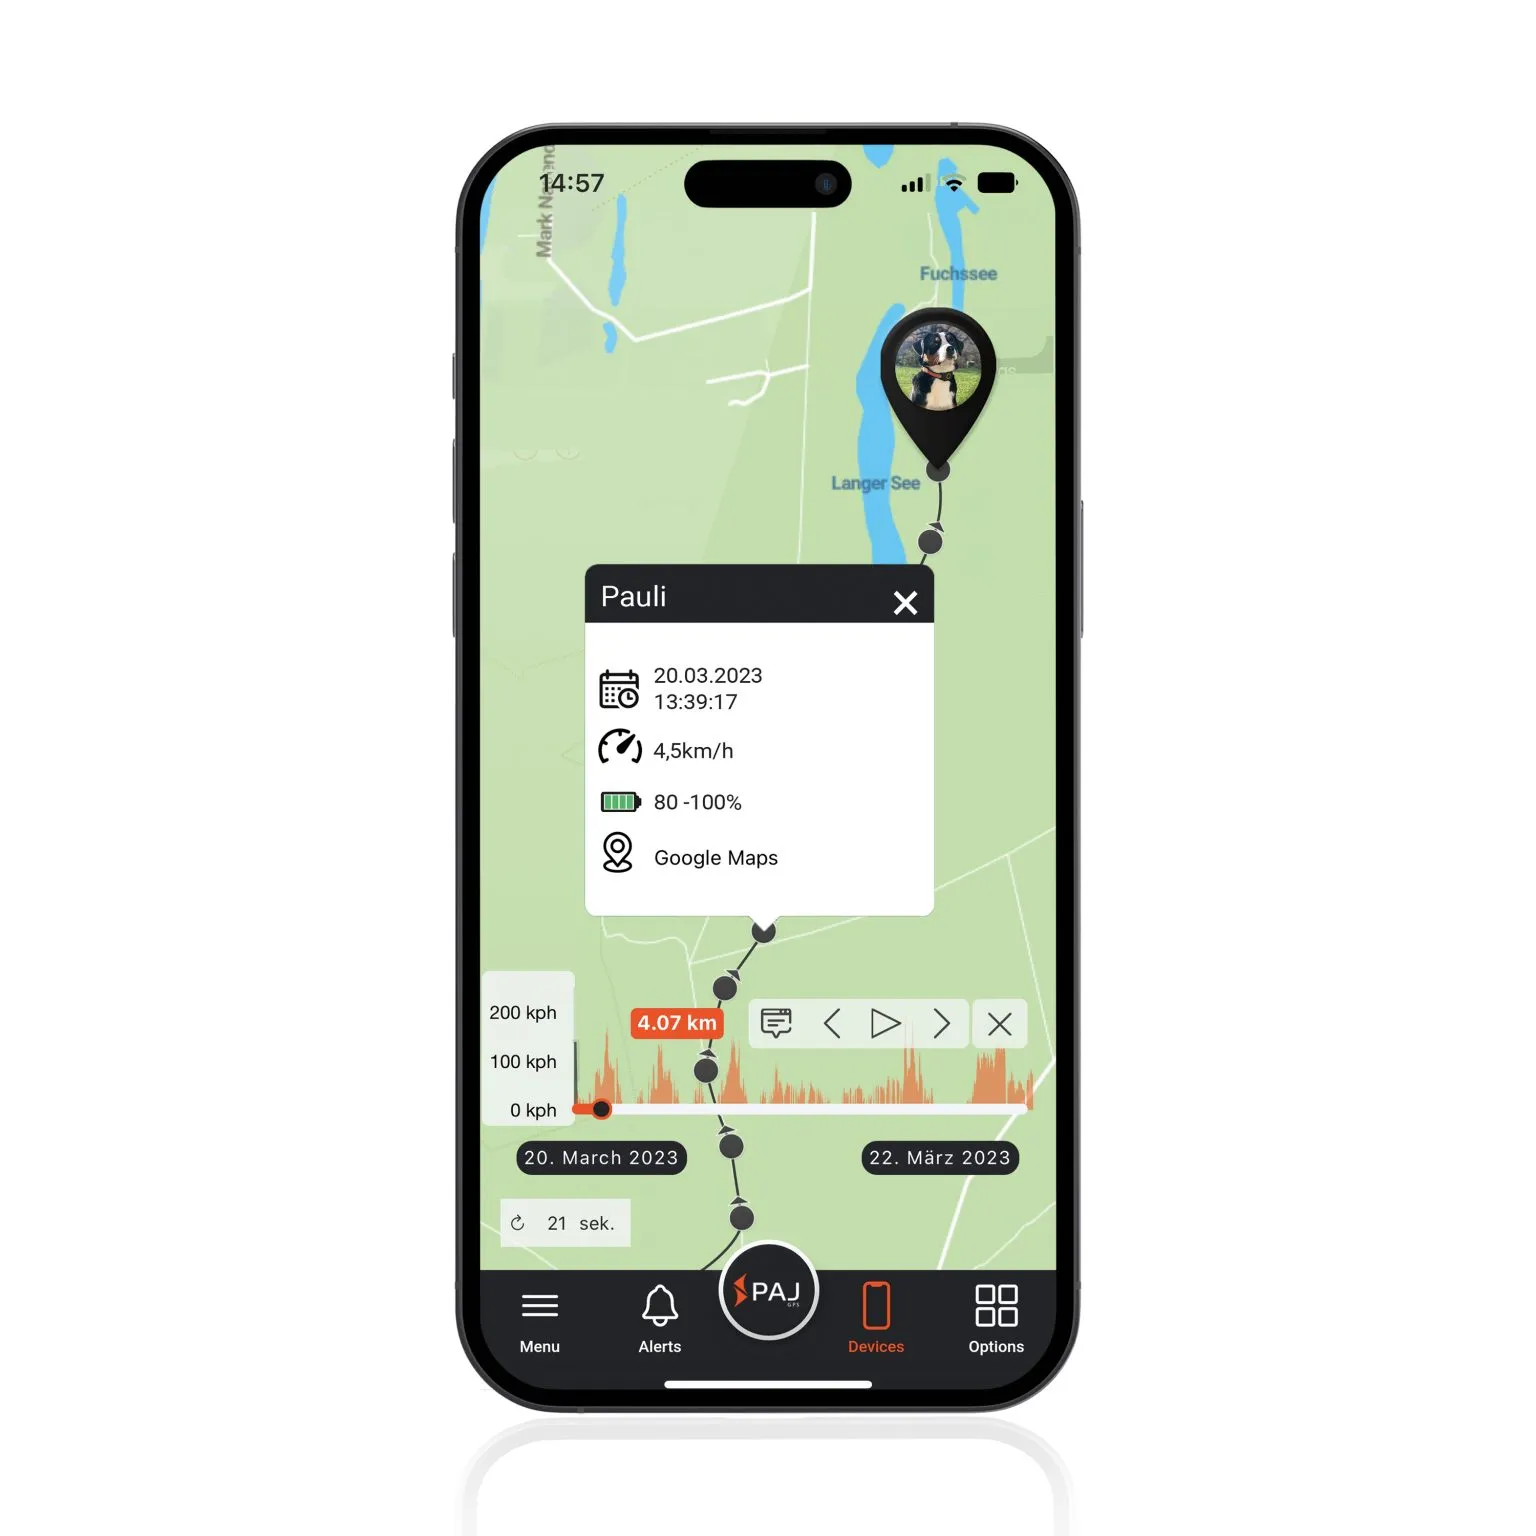 Mockup route tracking route history Pets FINDER Portal from PAJ GPS Tracker